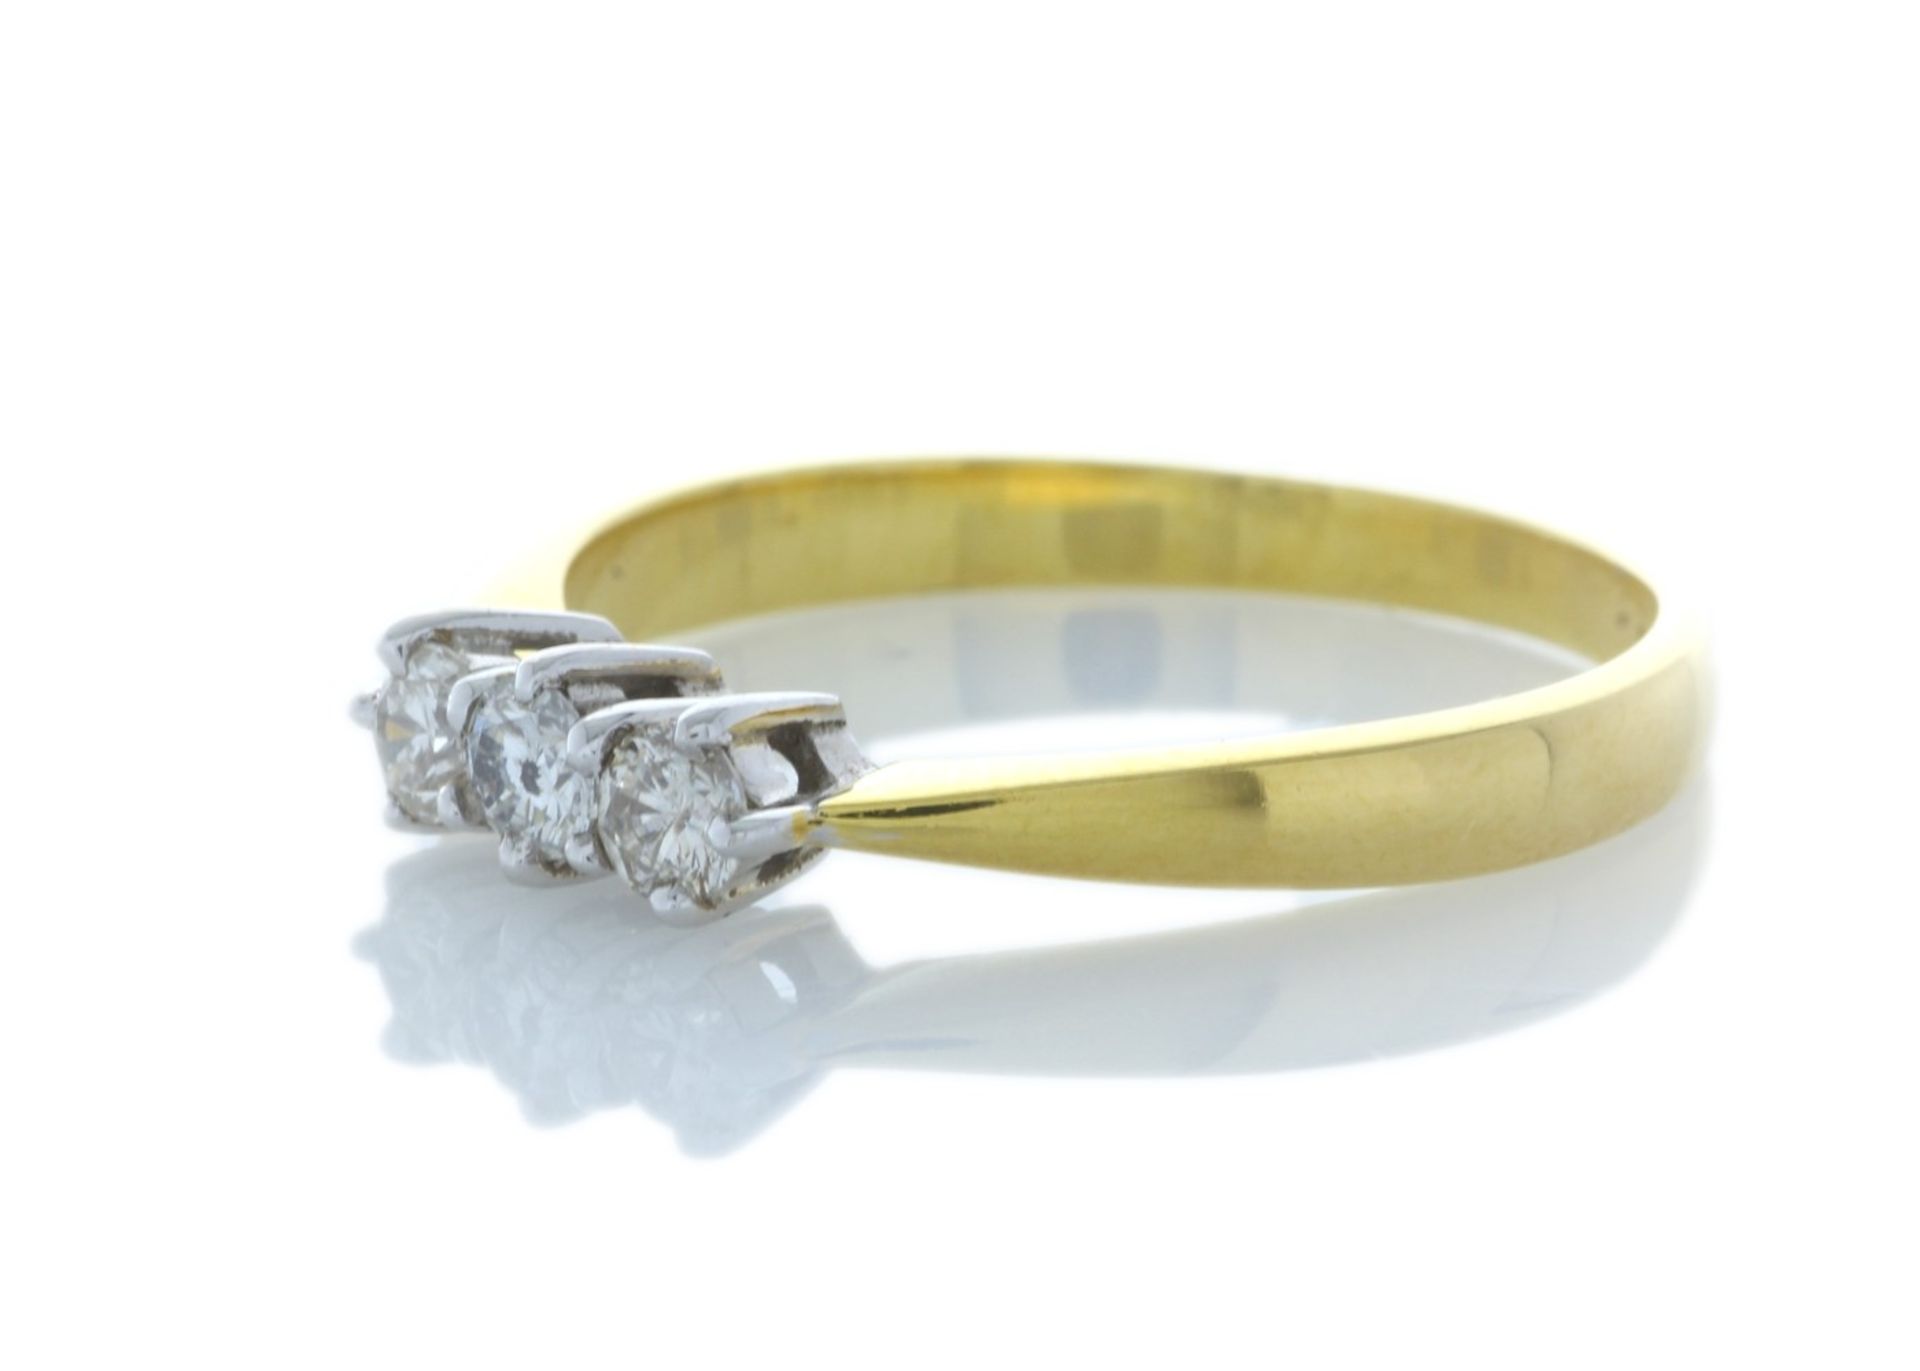 9ct Yellow Gold Three Stone Claw Set Diamond Ring 0.25 Carats - Valued by AGI £957.00 - 9ct Yellow - Image 2 of 4